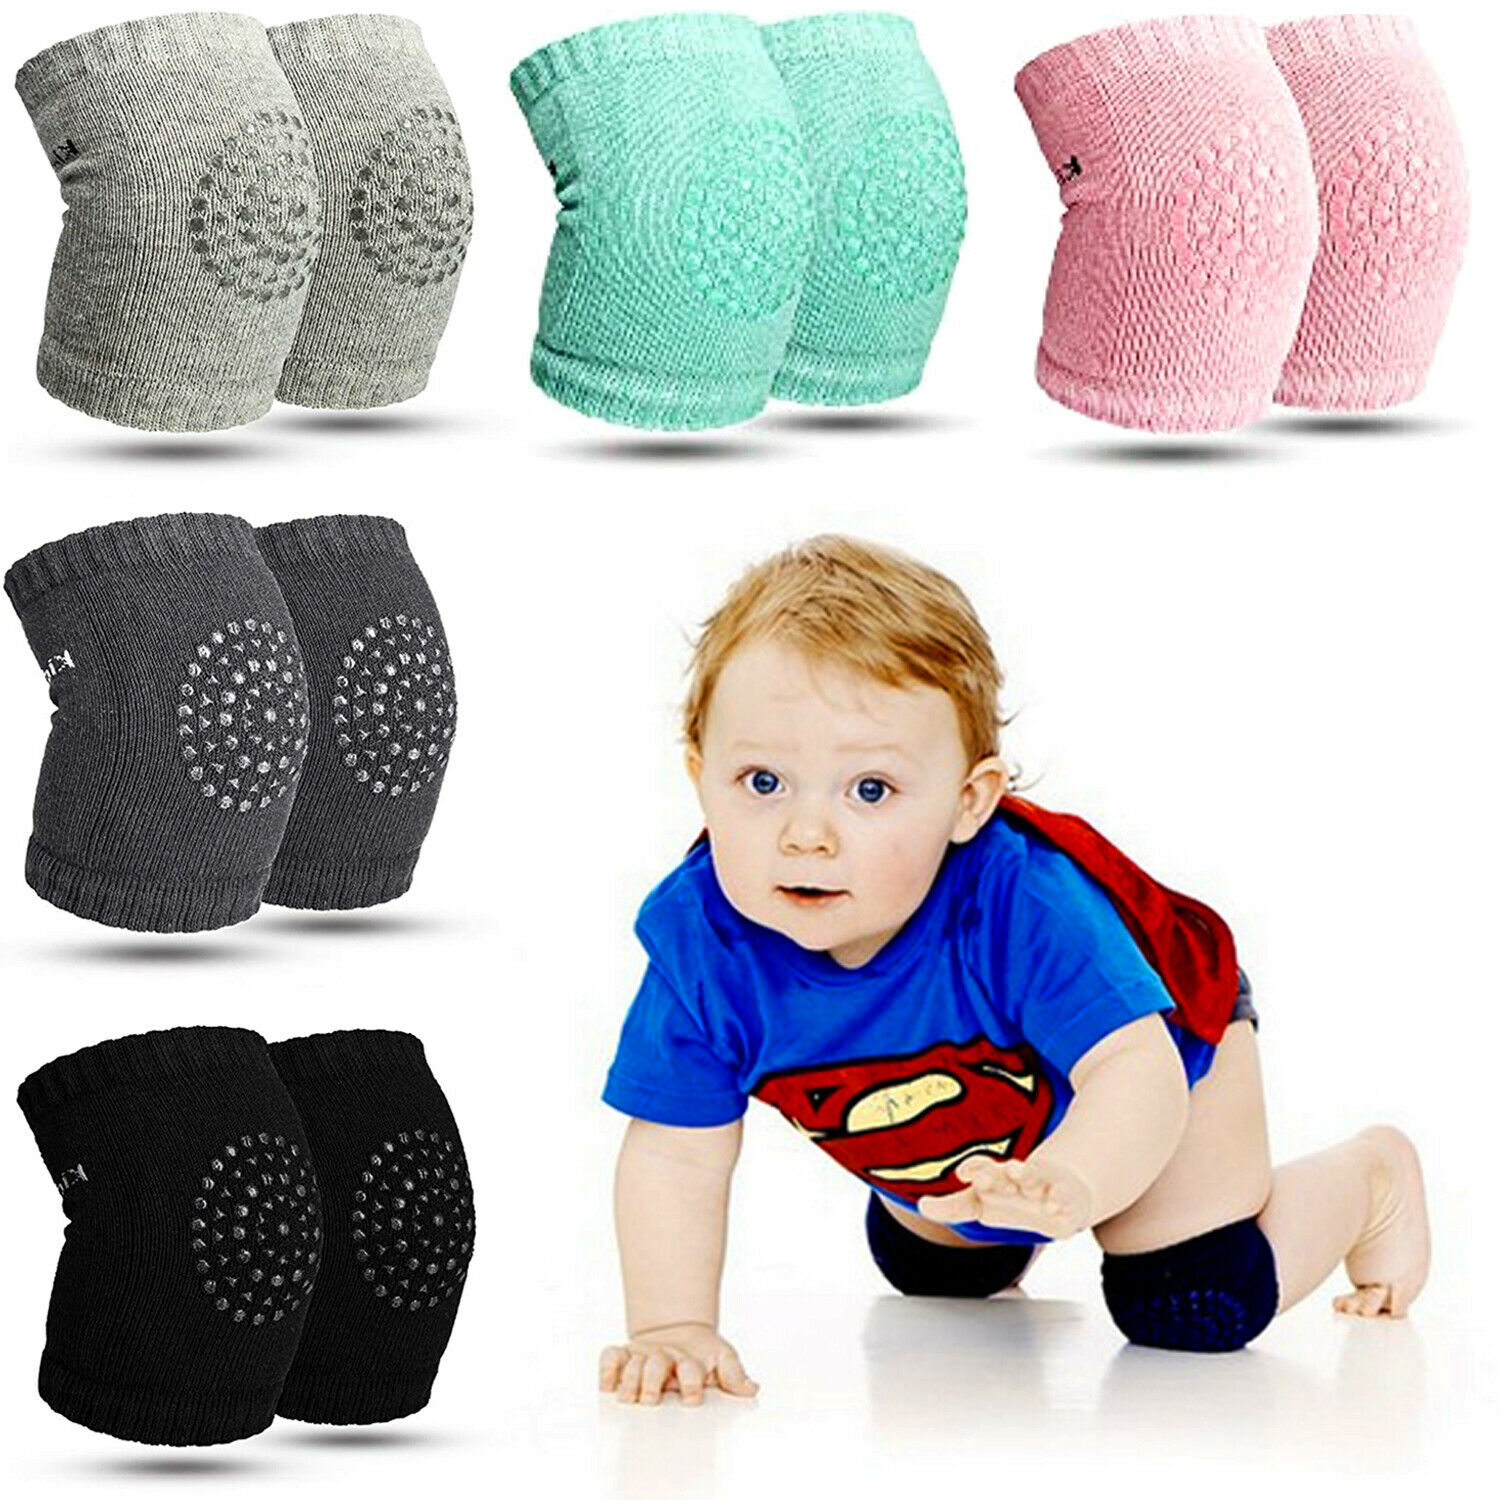 5 Pairs Crawling Knee Pads Safety Anti-slip Walking Leg Elbow Protector For Baby